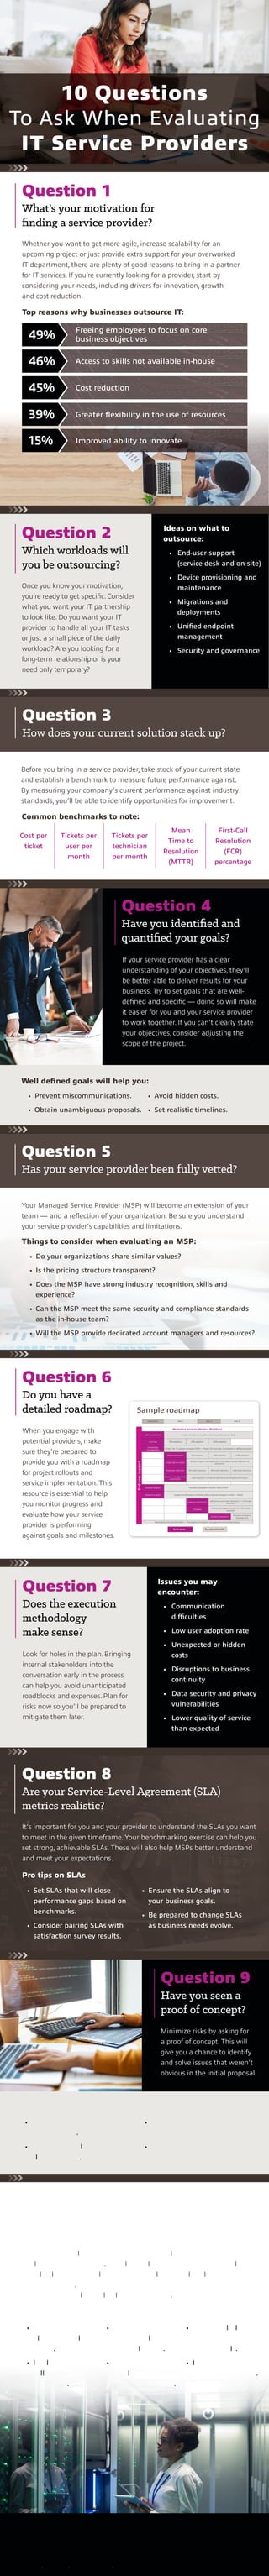 When you engage with
potential providers, make
sure they’re prepared to
provide you with a roadmap
for project rollouts and
service implementation. This
resource is essential to help
you monitor progress and
evaluate how your service
provider is performing
against goals and milestones.
Question 6
Do you have a
detailed roadmap?
Question 5
Has your service provider been fully vetted?
Your Managed Service Provider (MSP) will become an extension of your
team — and a reflection of your organization. Be sure you understand
your service provider’s capabilities and limitations.
Things to consider when evaluating an MSP:
Well defined goals will help you:
•	 Prevent miscommunications.
•	 Obtain unambiguous proposals.
•	 Avoid hidden costs.
•	 Set realistic timelines.
Question 3
How does your current solution stack up?
Before you bring in a service provider, take stock of your current state
and establish a benchmark to measure future performance against.
By measuring your company’s current performance against industry
standards, you’ll be able to identify opportunities for improvement.
Common benchmarks to note:
Cost per
ticket
Tickets per
user per
month
Tickets per
technician
per month
Mean
Time to
Resolution
(MTTR)
First-Call
Resolution
(FCR)
percentage
10 Questions
To Ask When Evaluating
IT Service Providers
Whether you want to get more agile, increase scalability for an
upcoming project or just provide extra support for your overworked
IT department, there are plenty of good reasons to bring in a partner
for IT services. If you’re currently looking for a provider, start by
considering your needs, including drivers for innovation, growth
and cost reduction.
Top reasons why businesses outsource IT:
Question 1
What’s your motivation for
finding a service provider?
Freeing employees to focus on core
business objectives
Access to skills not available in-house
Cost reduction
Greater flexibility in the use of resources
Improved ability to innovate
49%
46%
45%
39%
15%
Once you know your motivation,
you’re ready to get specific. Consider
what you want your IT partnership
to look like. Do you want your IT
provider to handle all your IT tasks
or just a small piece of the daily
workload? Are you looking for a
long-term relationship or is your
need only temporary?
Ideas on what to
outsource:
	 •	 End-user support 			
		 (service desk and on-site)
	 •	 Device provisioning and 	
		 maintenance
	 •	 Migrations and 			
		 deployments
	 •	 Unified endpoint 			
		 management
	 •	 Security and governance
Question 2
Which workloads will
you be outsourcing?
Question 4
Have you identified and
quantified your goals?
If your service provider has a clear
understanding of your objectives, they’ll
be better able to deliver results for your
business. Try to set goals that are well-
defined and specific — doing so will make
it easier for you and your service provider
to work together. If you can’t clearly state
your objectives, consider adjusting the
scope of the project.
•	 Do your organizations share similar values?
•	 Is the pricing structure transparent?
•	 Does the MSP have strong industry recognition, skills and
	experience?
•	 Can the MSP meet the same security and compliance standards
	 as the in-house team?
•	 Will the MSP provide dedicated account managers and resources?
Sample roadmap
End-usersupport
Workplace Services: Modern Workforce
24/7 service desk Implement SLA-driven, demand-based, global service desk.
Live chat 15% adoption 25% adoption >25% adoption
Knowledge
management
Phase 1 for IT support: Increase FCR% — Phase 2 for end user: Foundation of self-service portal
Self-service portal 5% adoption 10% adoption >15% adoption
Single sign-on portal
Ability to layer in key applications for ease of access, reduction of
passwords
Password reset tool 2% ticket reduction 4% ticket reduction >5% ticket reduction
Account management
automation
Task reduction / condense new hire & termination time frame
Deskside support Transition deskside technician roles to MSP
Dispatch support Support small footprint facilities with on-demand dispatch model — Global
Software distribution
Self-service and ticket reduction | 1–2 % ticket
reduction
Chatbots
Self-service support stream | 5– 10% ticket
reduction
Incident prevention
Proactive endpoint
management
Governance and transformation — Foundation of program management and transformation
Integration Year 1 Year 2 Year 3
Look for holes in the plan. Bringing
internal stakeholders into the
conversation early in the process
can help you avoid unanticipated
roadblocks and expenses. Plan for
risks now so you’ll be prepared to
mitigate them later.
Question 7
Does the execution
methodology
make sense?
Issues you may
encounter:
	•	Communication 				
		 difficulties
	 •	 Low user adoption rate	
	 •	 Unexpected or hidden 		
		 costs
	 •	 Disruptions to business 		
		 continuity
	 •	 Data security and privacy 	
		 vulnerabilities
	 •	 Lower quality of service 		
		 than expected
Question 8
Are your Service-Level Agreement (SLA)
metrics realistic?
It’s important for you and your provider to understand the SLAs you want
to meet in the given timeframe. Your benchmarking exercise can help you
set strong, achievable SLAs. These will also help MSPs better understand
and meet your expectations.
Pro tips on SLAs
•	 Set SLAs that will close
performance gaps based on
benchmarks.
•	 Consider pairing SLAs with
satisfaction survey results.
•	 Ensure the SLAs align to
your business goals.
•	 Be prepared to change SLAs
as business needs evolve.
Question 9
Have you seen a
proof of concept?
Minimize risks by asking for
a proof of concept. This will
give you a chance to identify
and solve issues that weren’t
obvious in the initial proposal.
Proof of concept benefits
The success or failure of a project can often be linked back to the
quality of communication. Establishing lines of communication early
and clearly specifying roles and responsibilities should help you ensure
better outcomes. However you decide to proceed, make sure your
expectations are always clearly communicated.
Question 10
Have you established a clear system of
communication?
Communication is key:
•	 Put a process in
place for escalating
issues.
•	 Implement
collaboration apps
as needed.
•	 Provide training
for internal and
external teams.
•	 Communicate
regulatory and
security standards.
•	 Meet regularly
to track progress
toward goals.
•	 Invest in managed
adoption processes.
Source
Raconteur. (2018, May 3). Future of Outsourcing.
•	 Gather data to support your
business case.
•	 Refine the implementation
plan if needed.
•	 Chance to address
communication or support gaps
•	 Reduced risk to business
Build phase Run phase/benefits
 